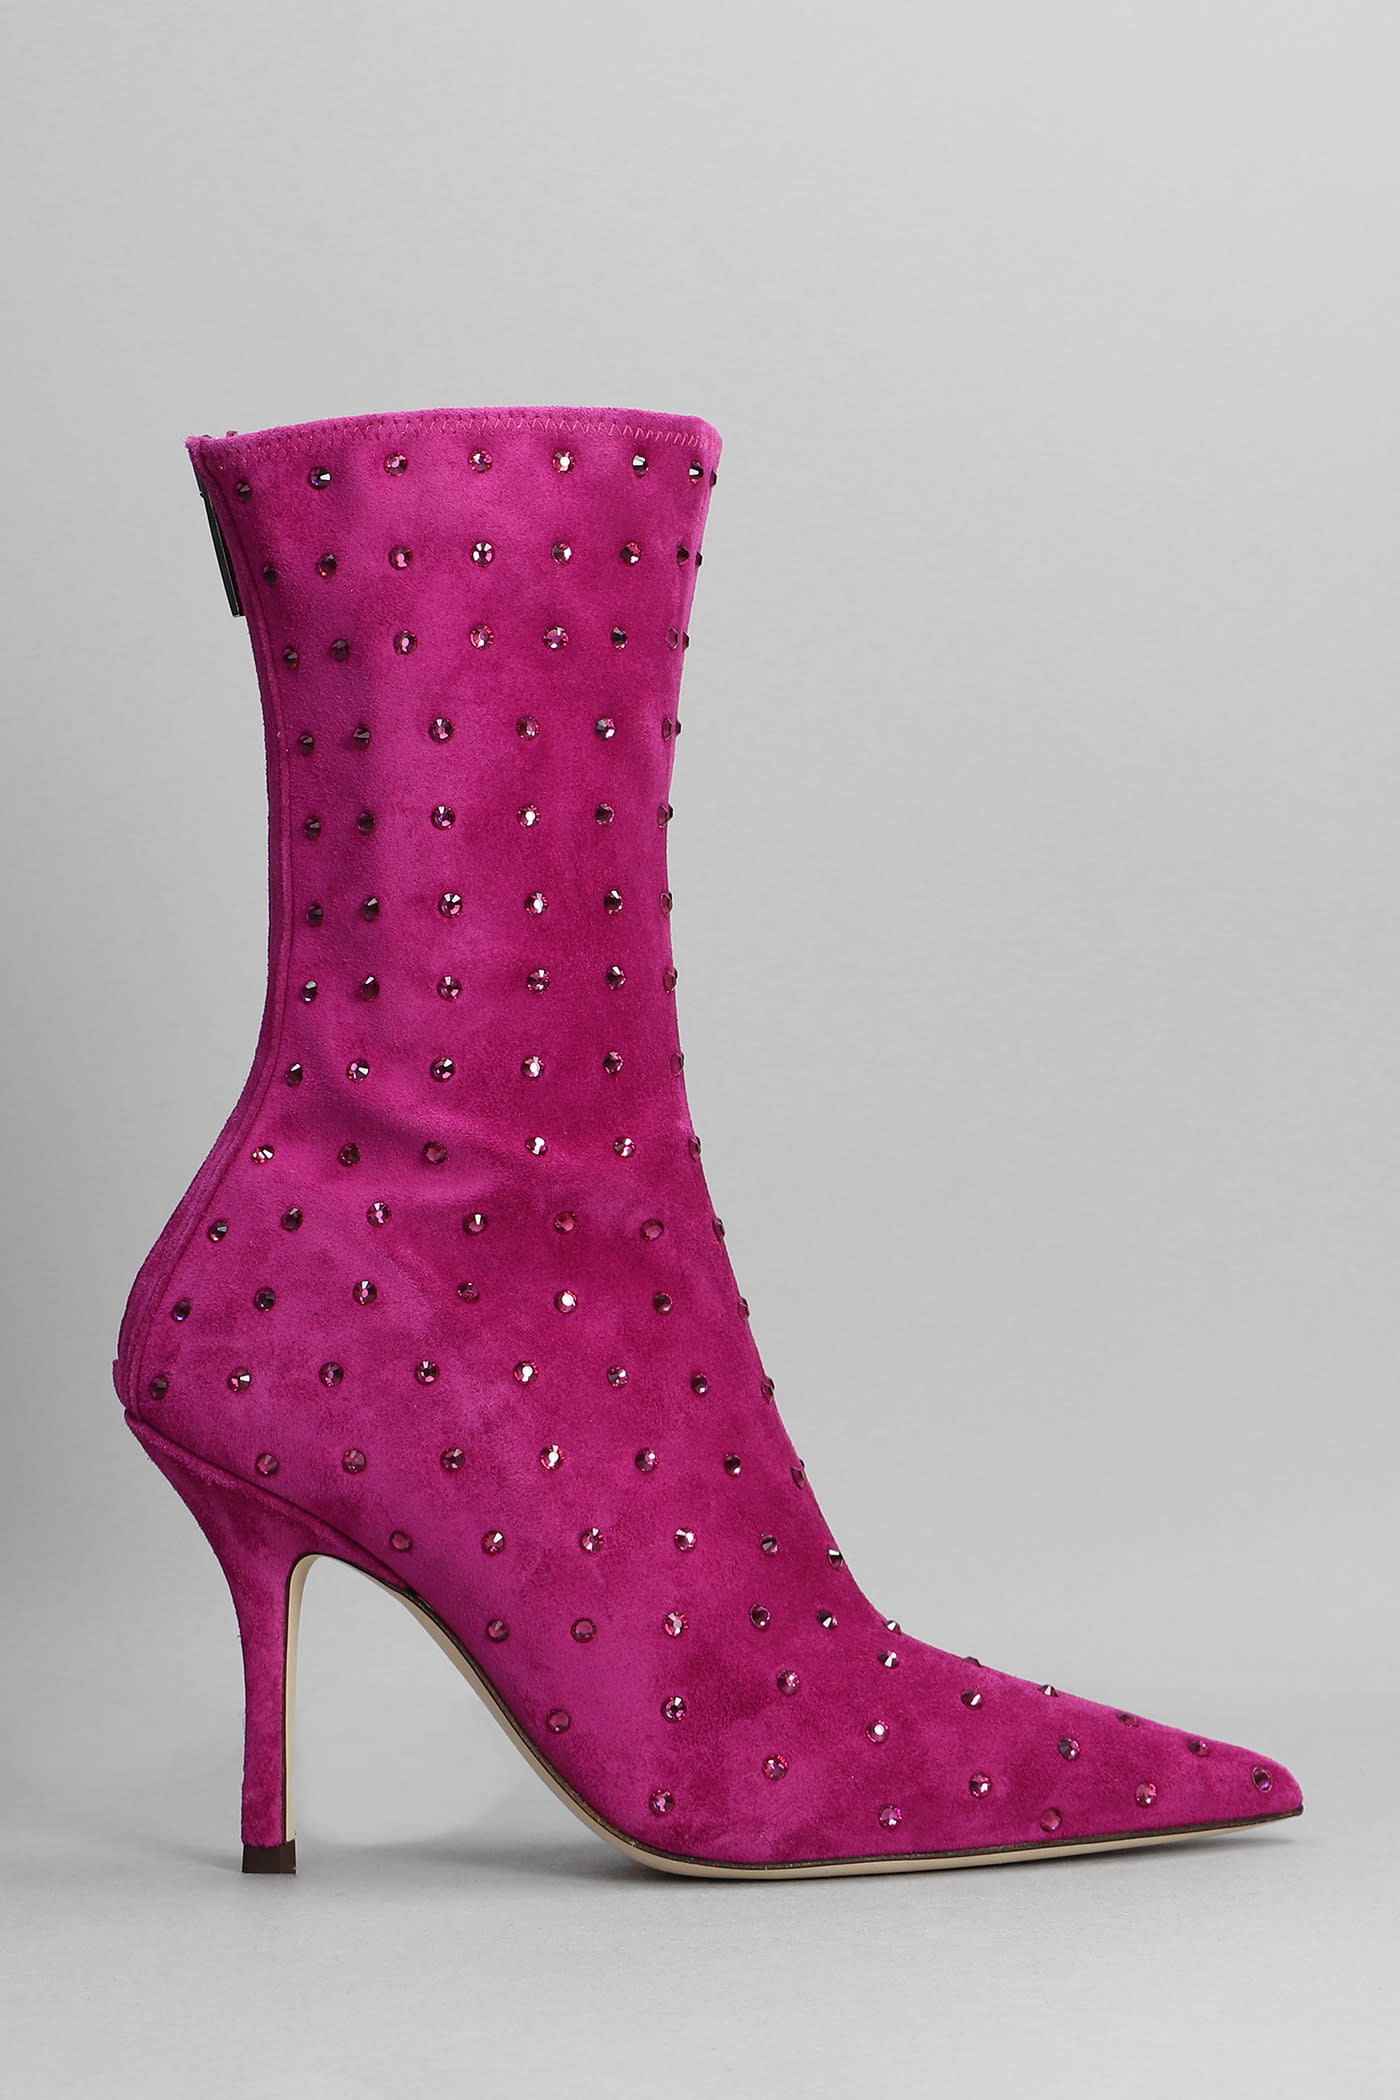 Paris Texas Holly Mama High Heels Ankle Boots In Fuxia Suede